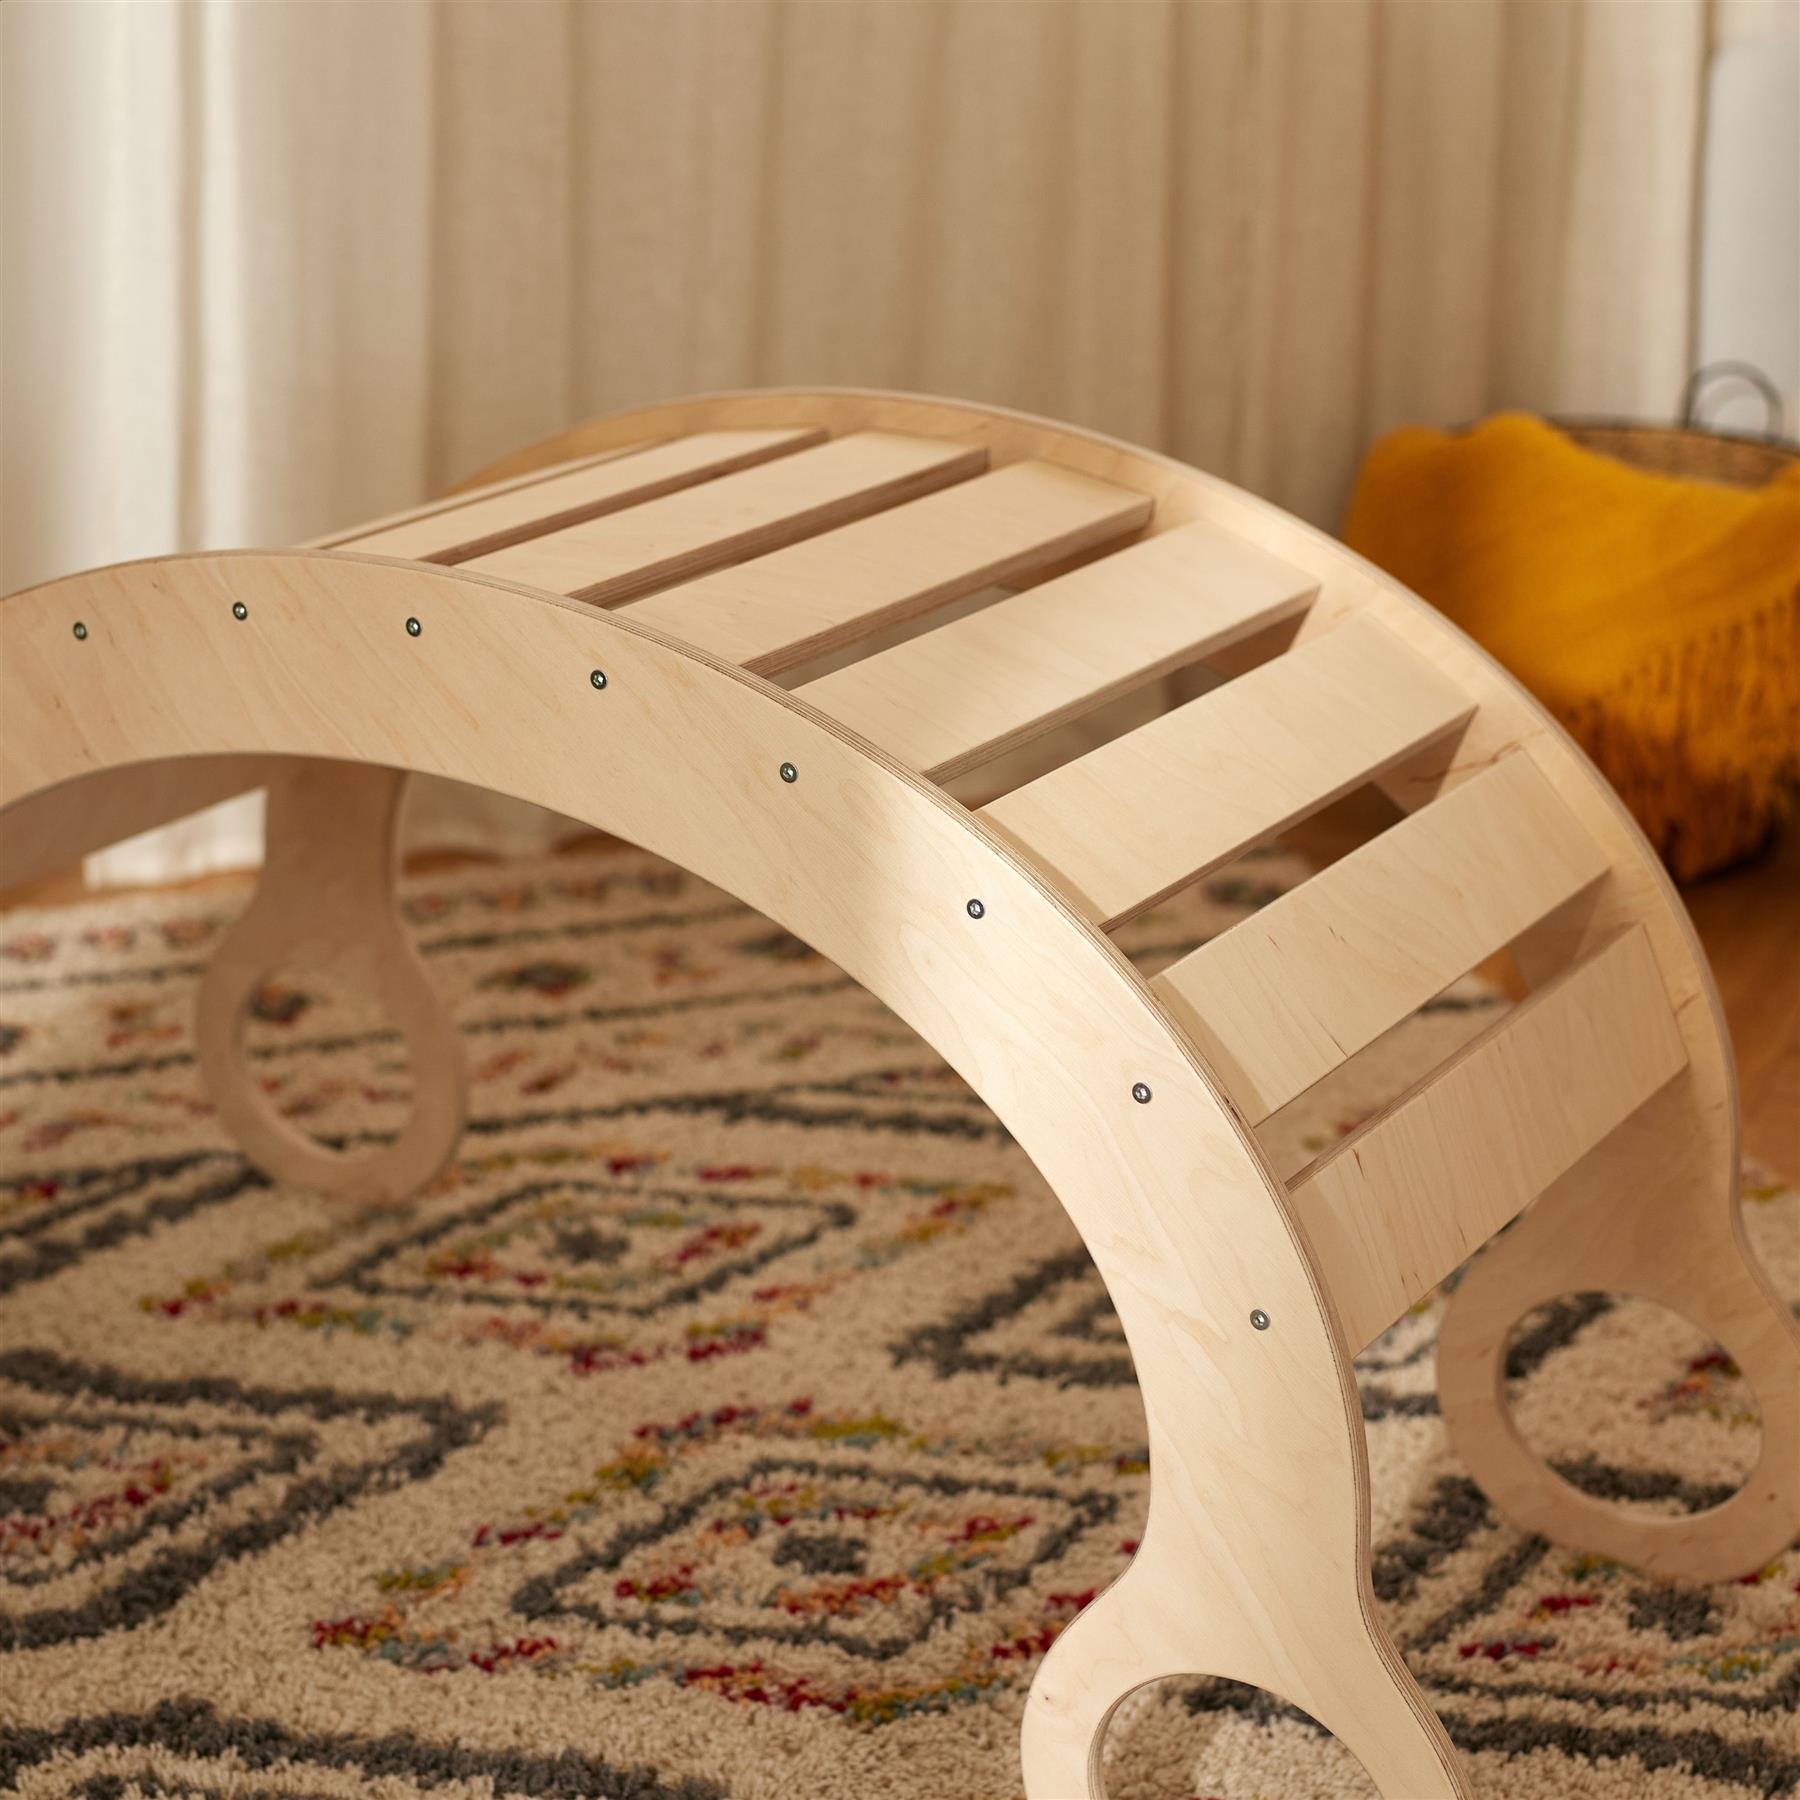 Wooden Climbing Arch Rocker For Toddler Large Montessori Climbing Activity Board